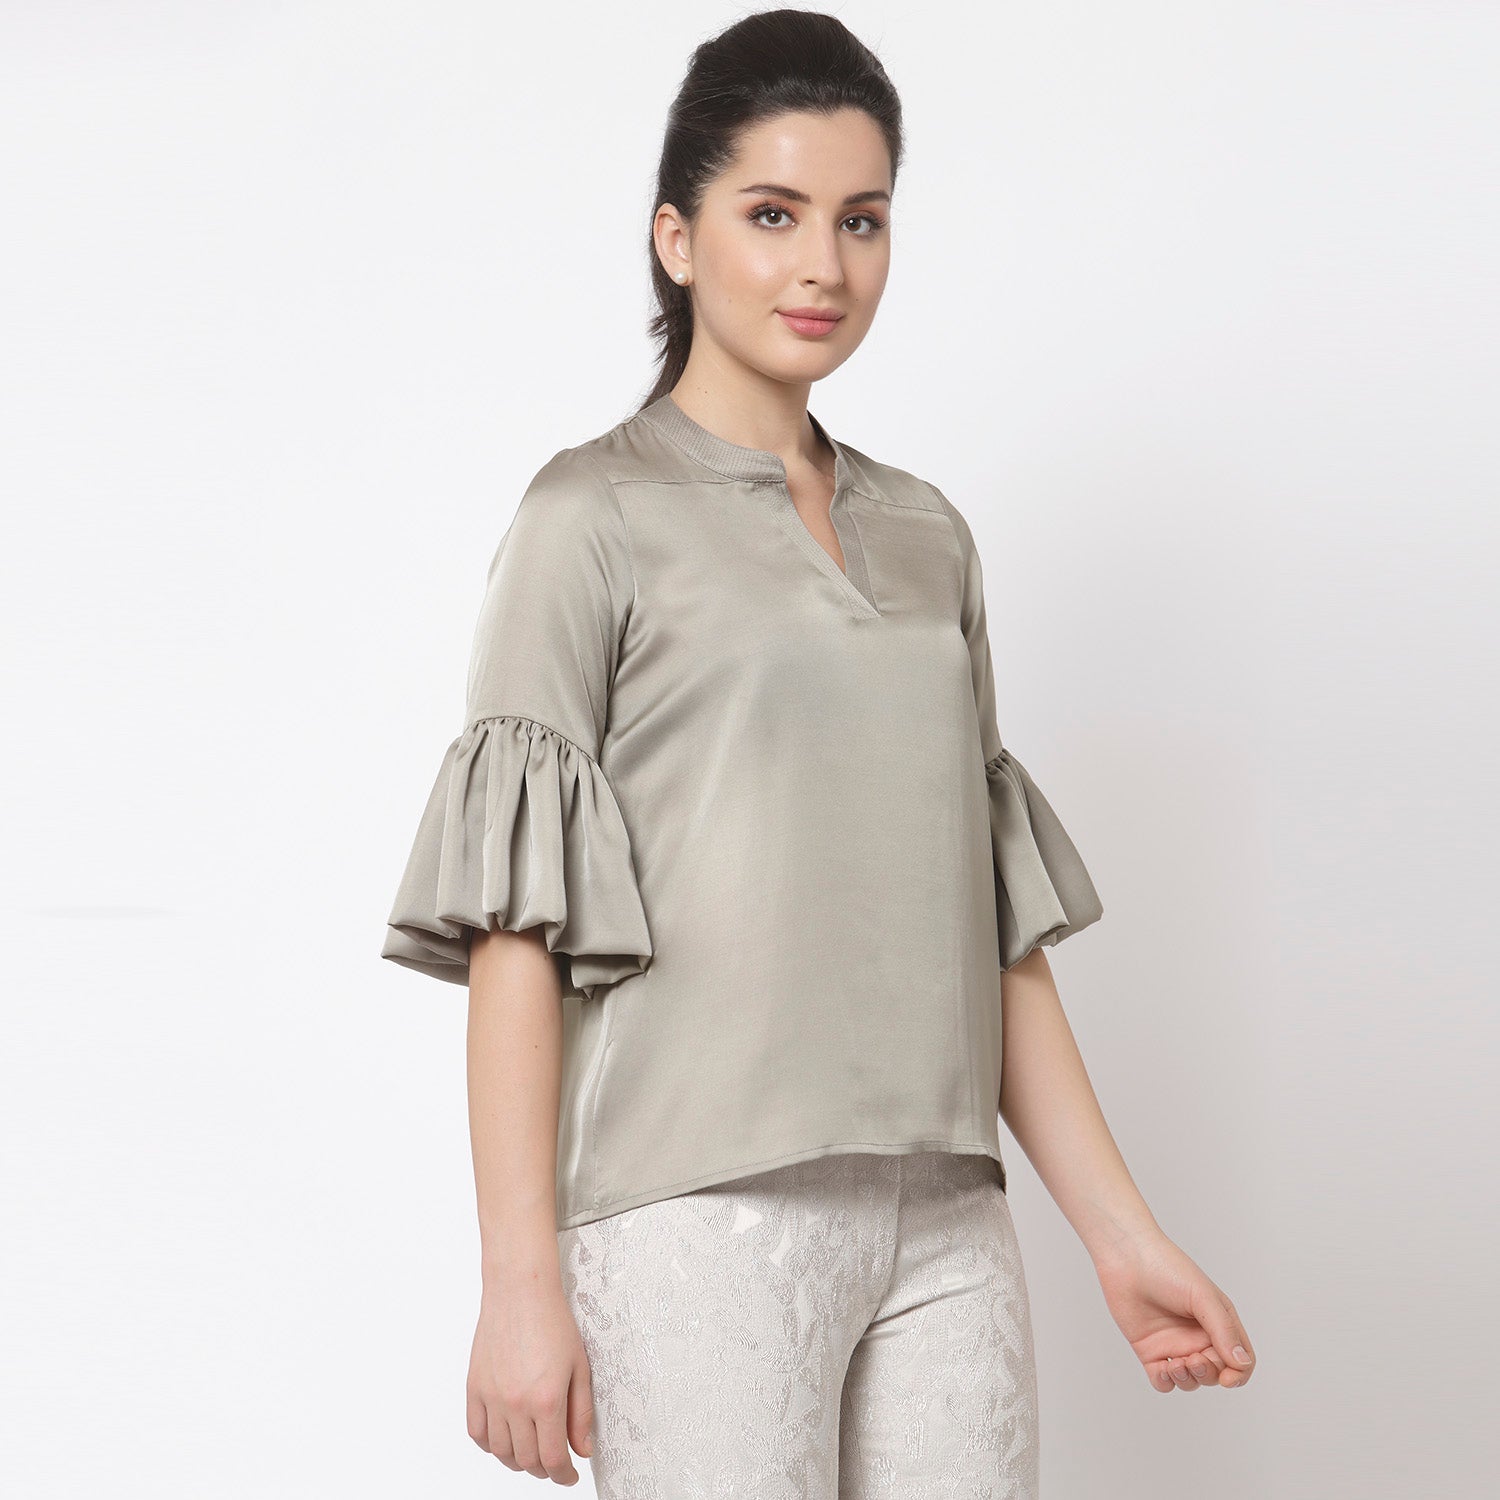 Grey satin top with puff sleeve